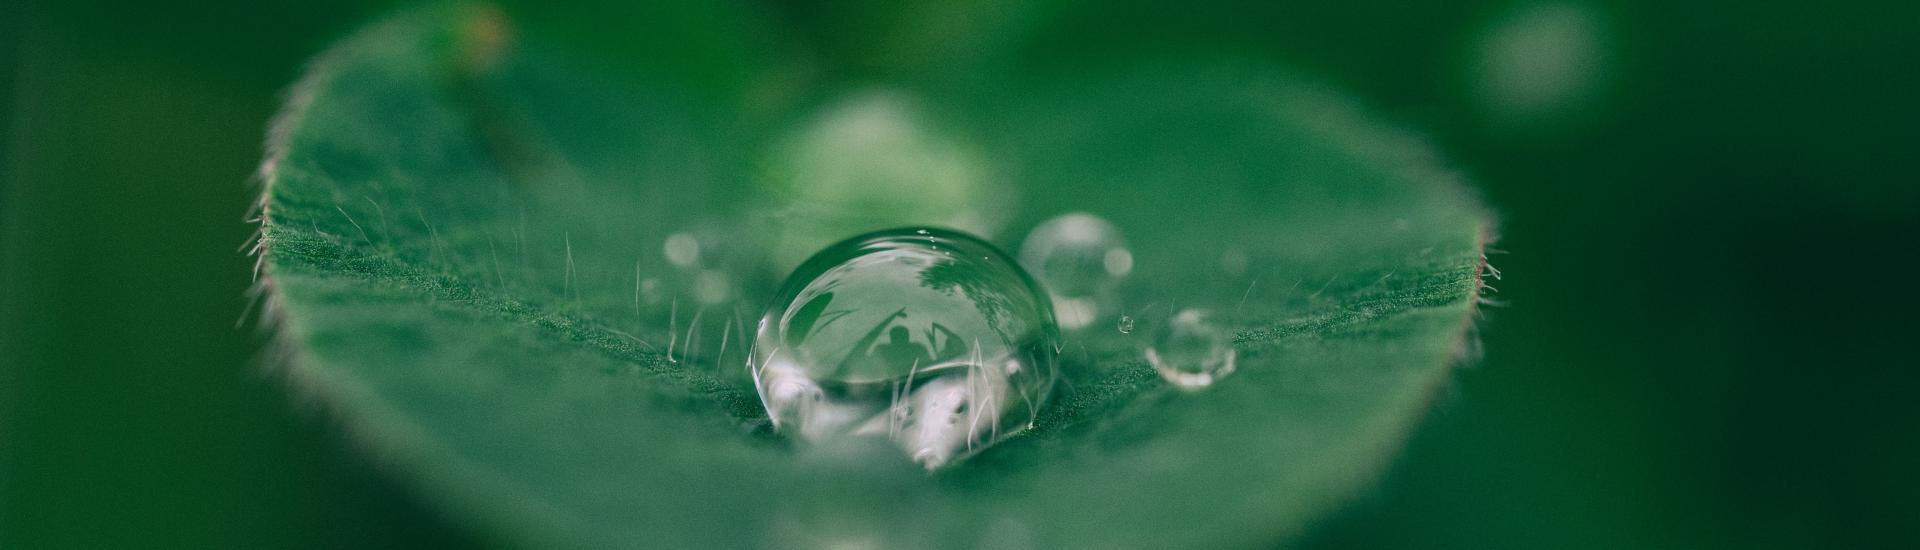 A close up of a drop of water sitting on a green leaf